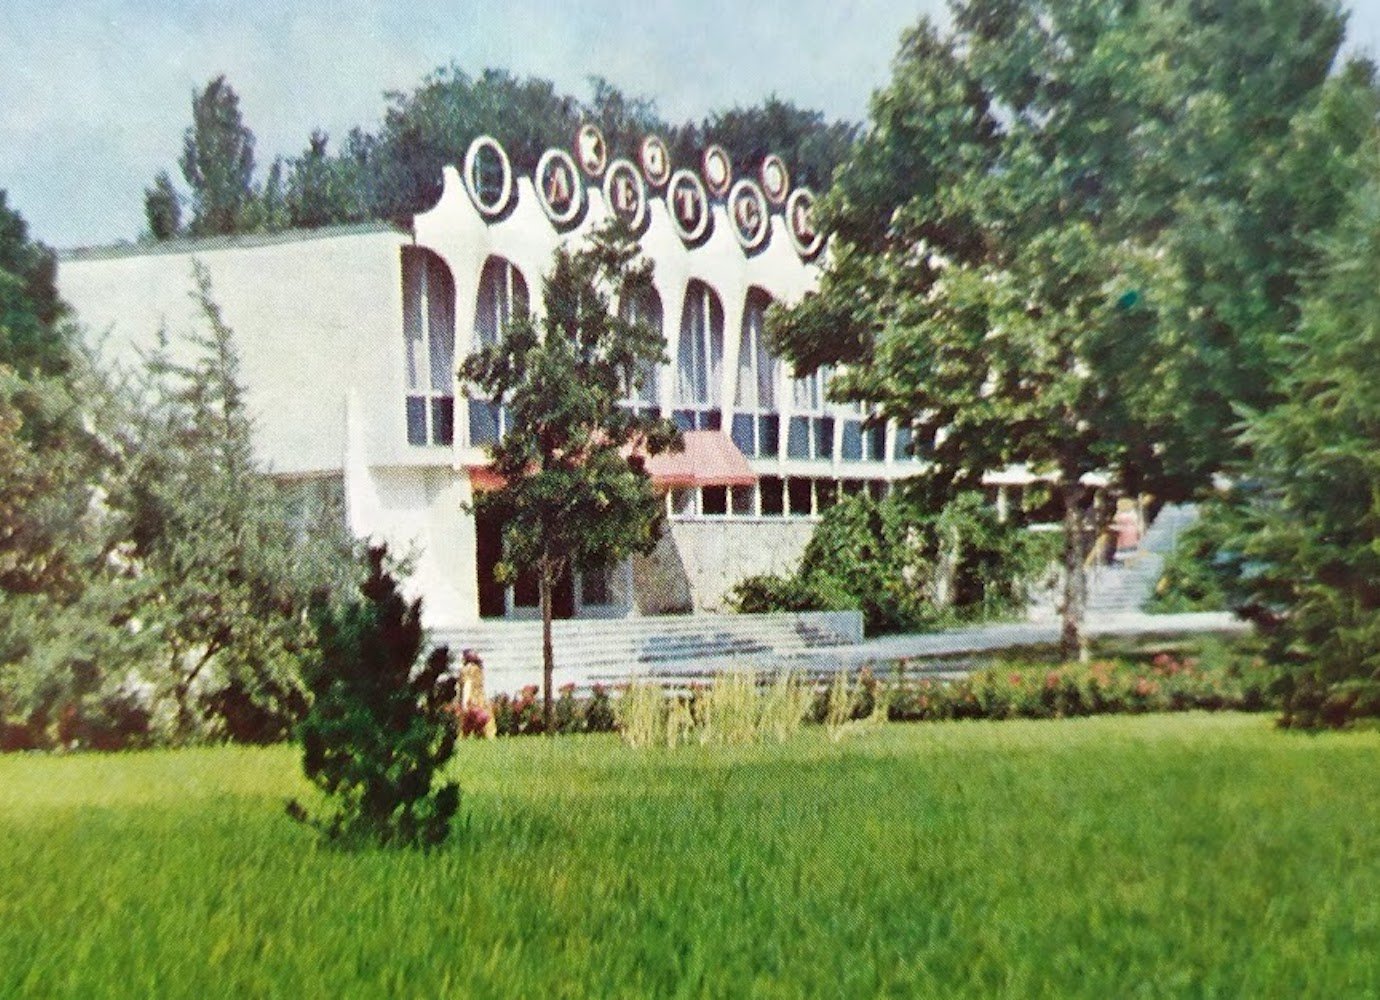 The late Soviet cafe that sparked a civic movement in Moldova | Concrete Ideas